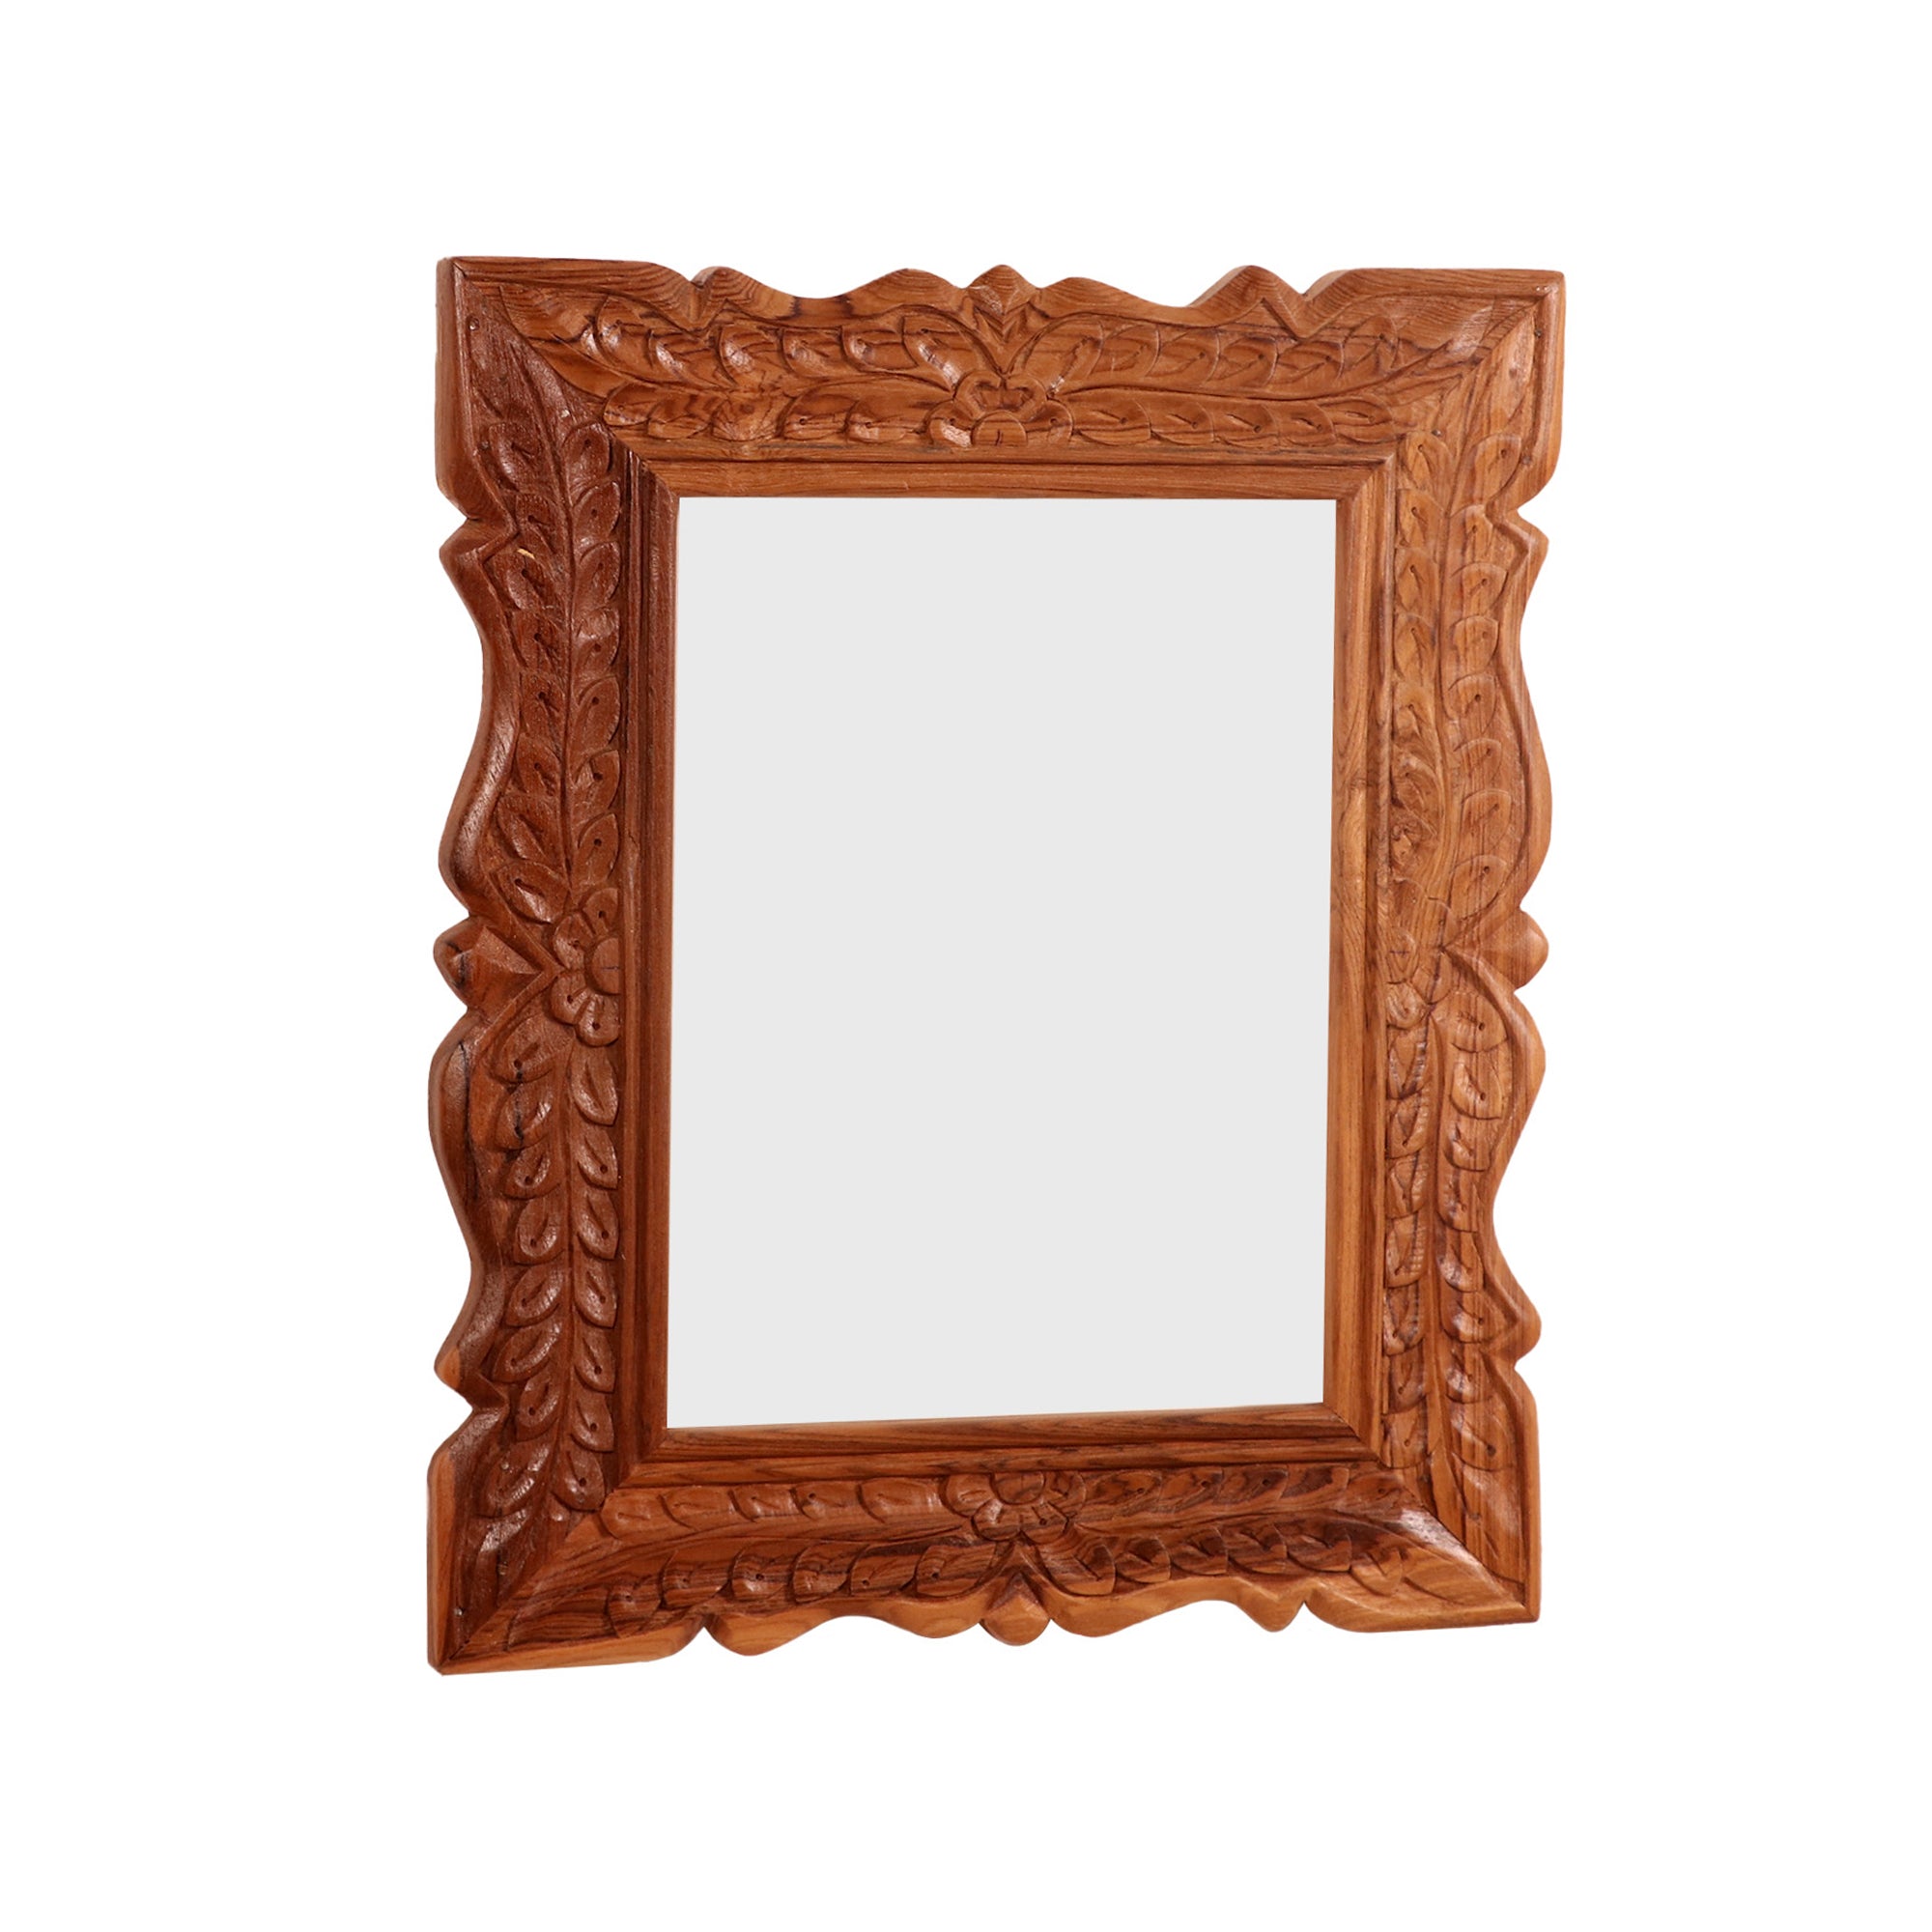 Compact Folk Style Carved Mirror Frame Mirror